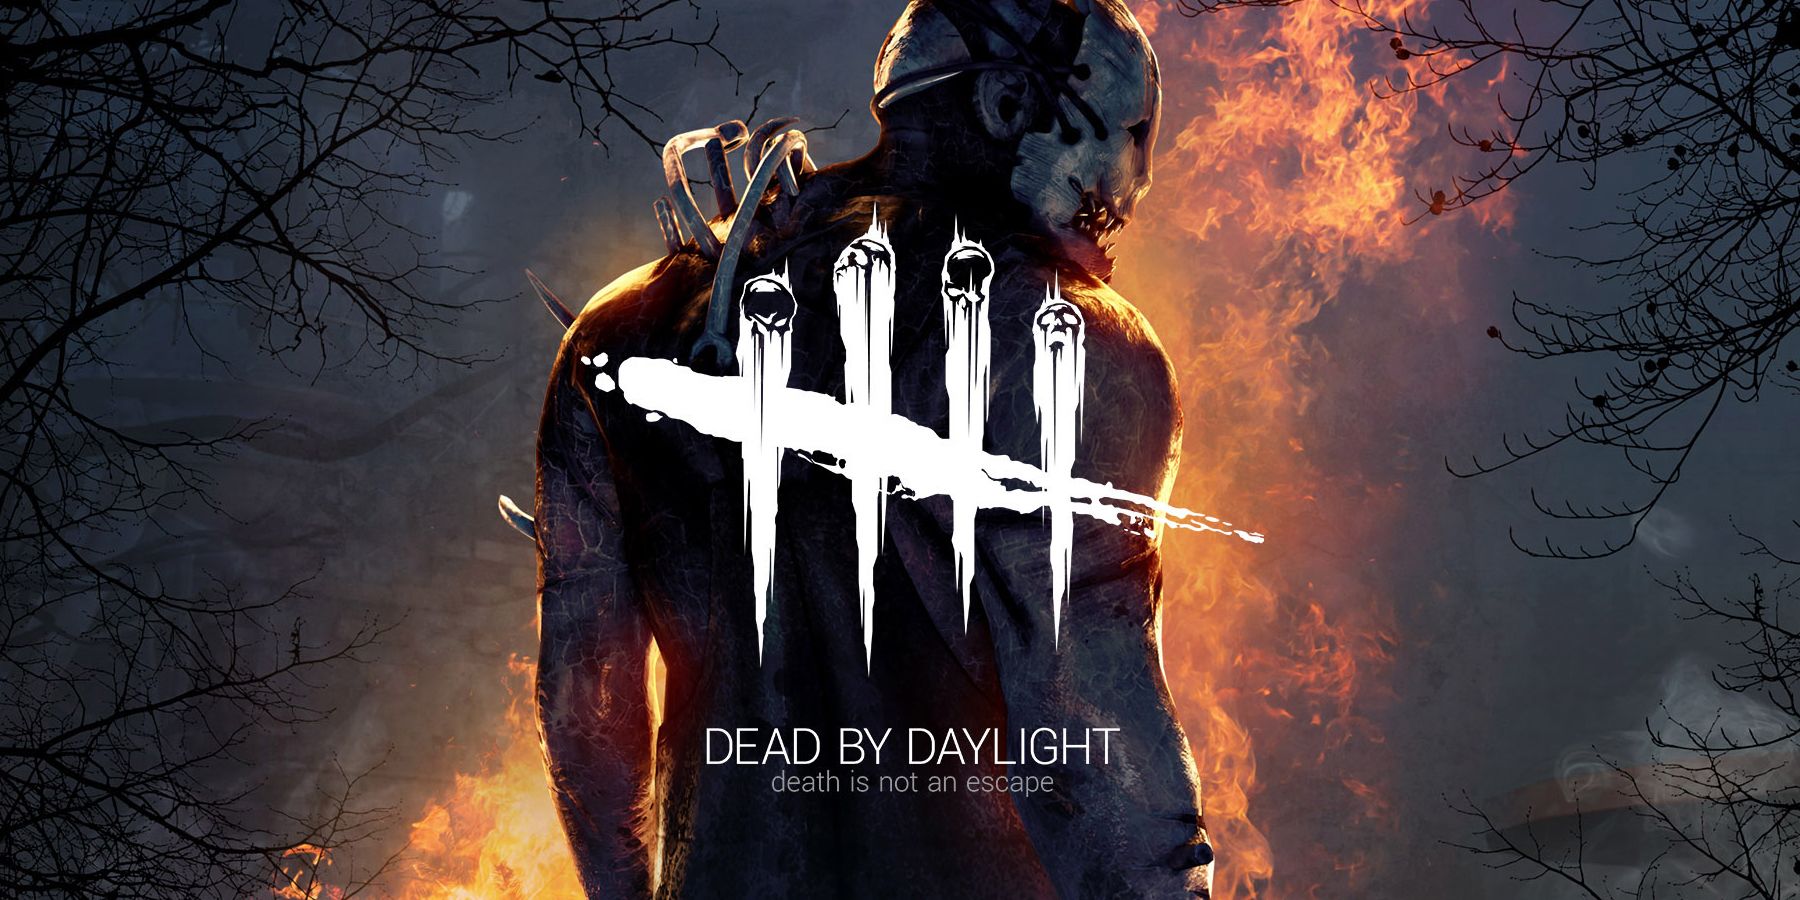 Dead by Daylight Update 6.7.1 Releases, Fixing Crashes and Lots of Bugs